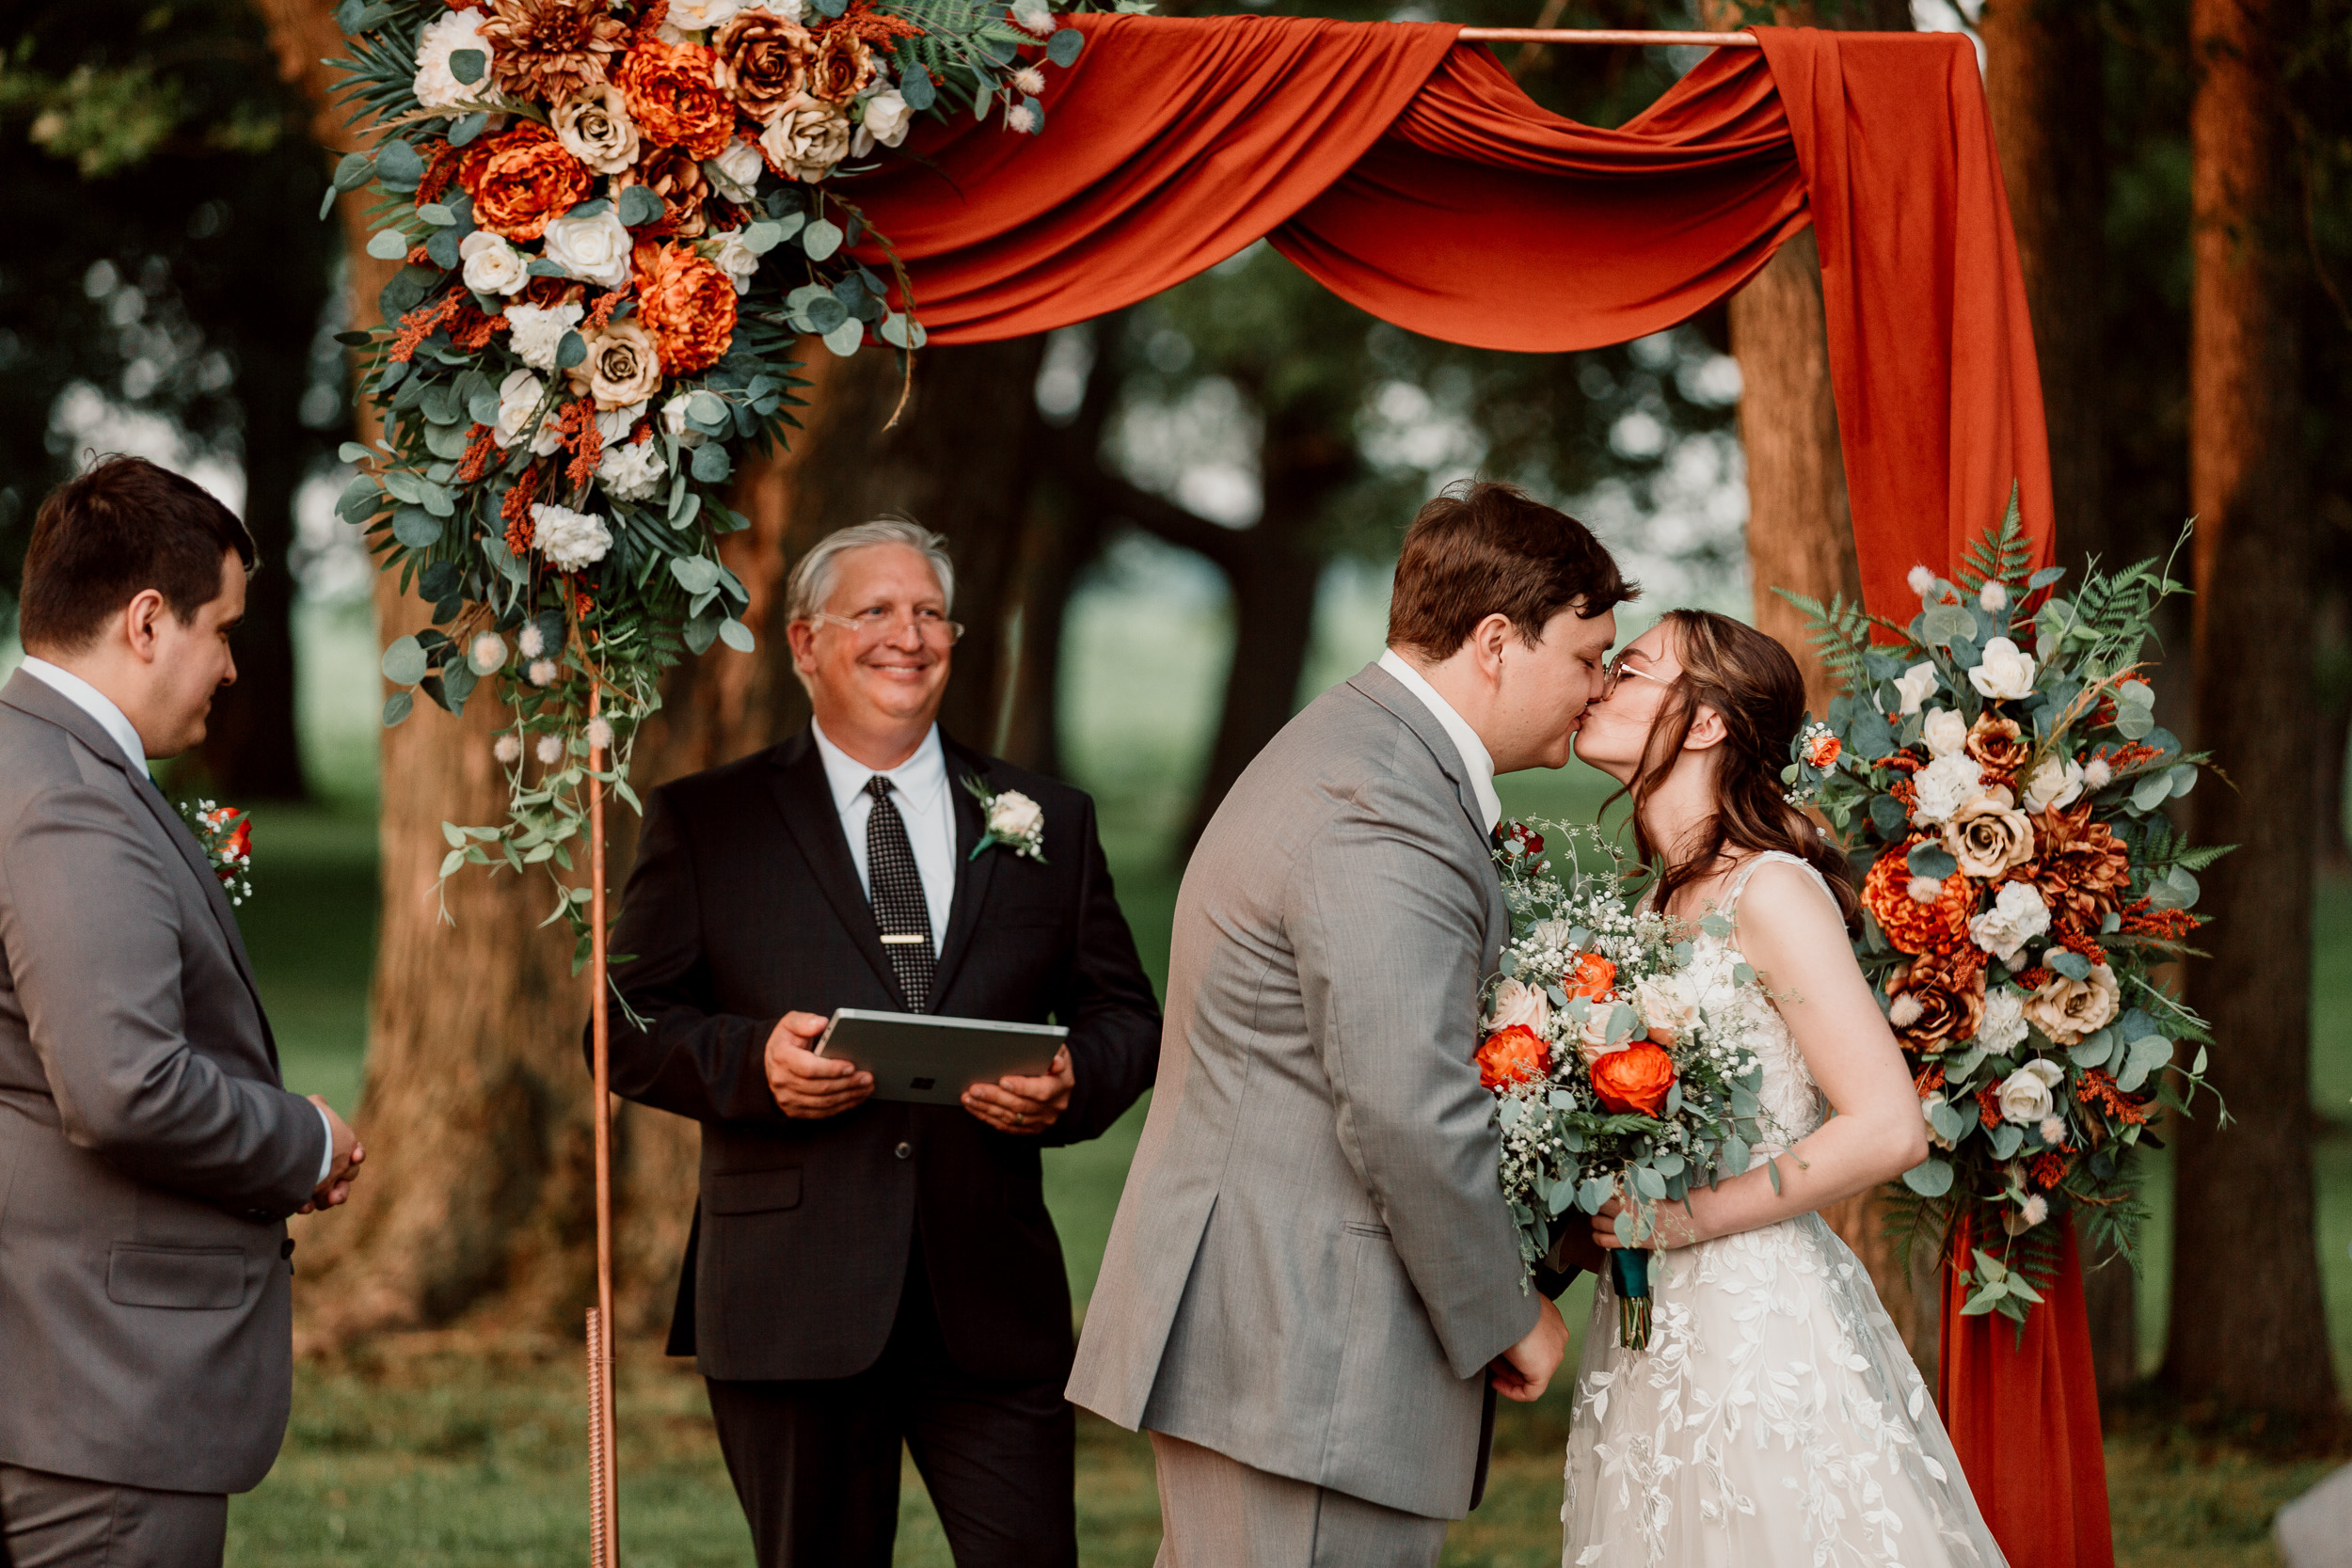 wedding arch with orange floral arrangement and fabric | Small Weddings Outdoors | Pecatonica Illinois